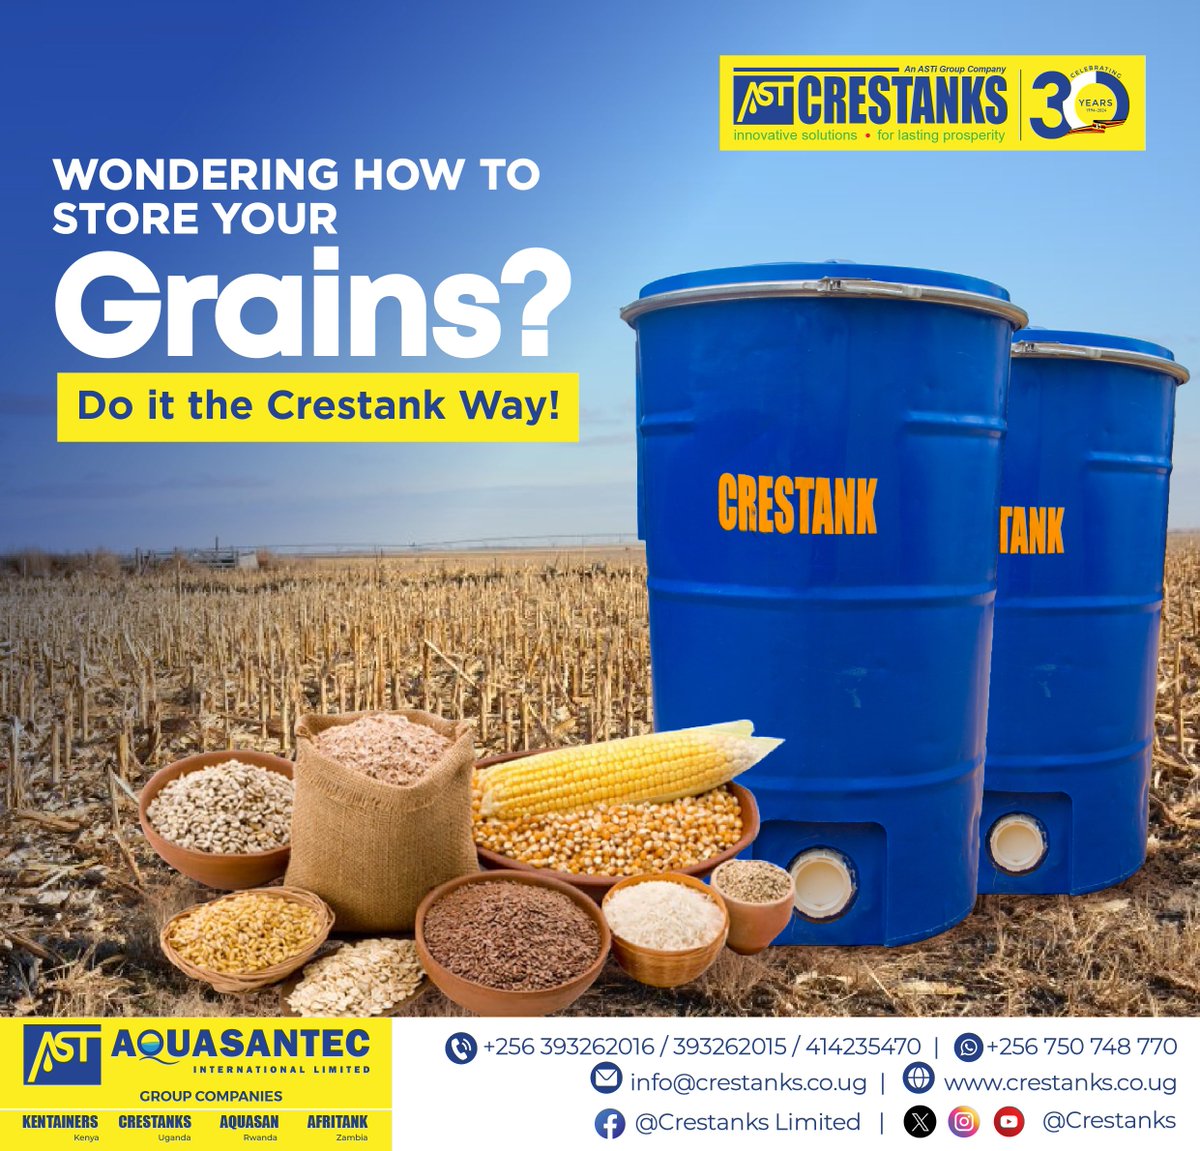 Safeguard your harvest🌾 with our top quality Grain Silos.

Contact us on 0750748770 to place your orders

#Crestanks #plasticproducts #grainsilos #grains